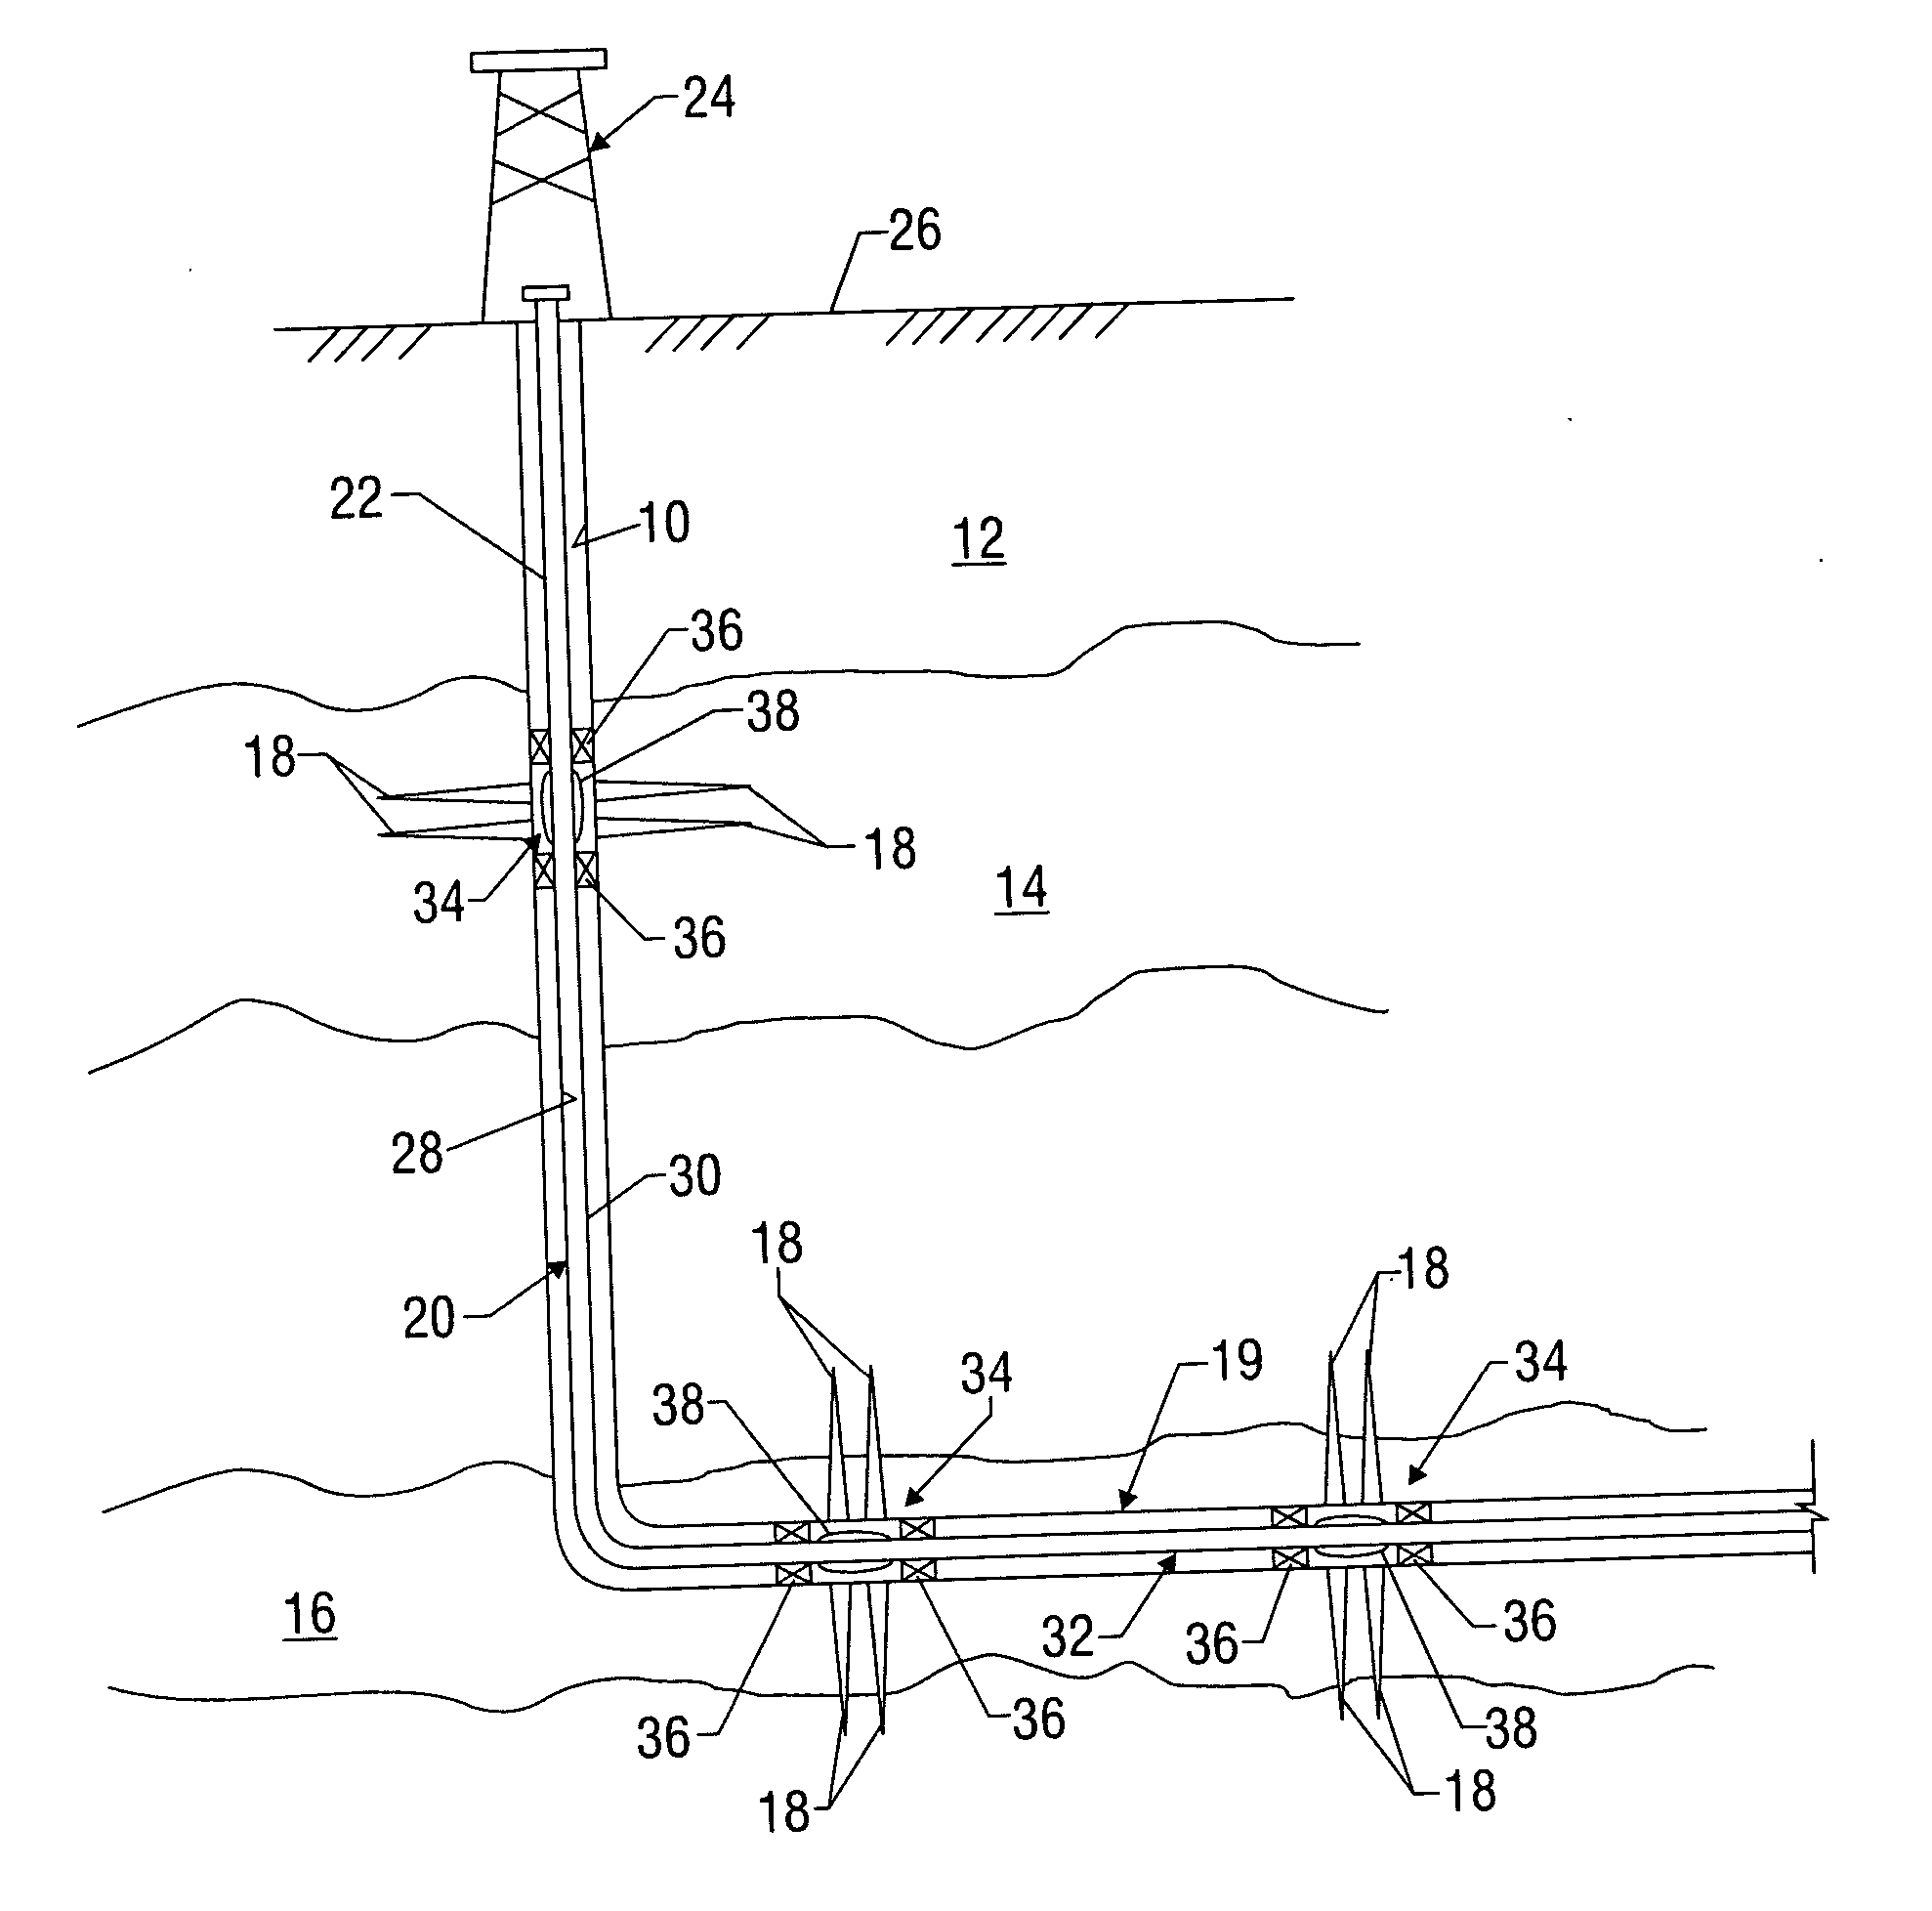 Inflow control device with passive shut-off feature